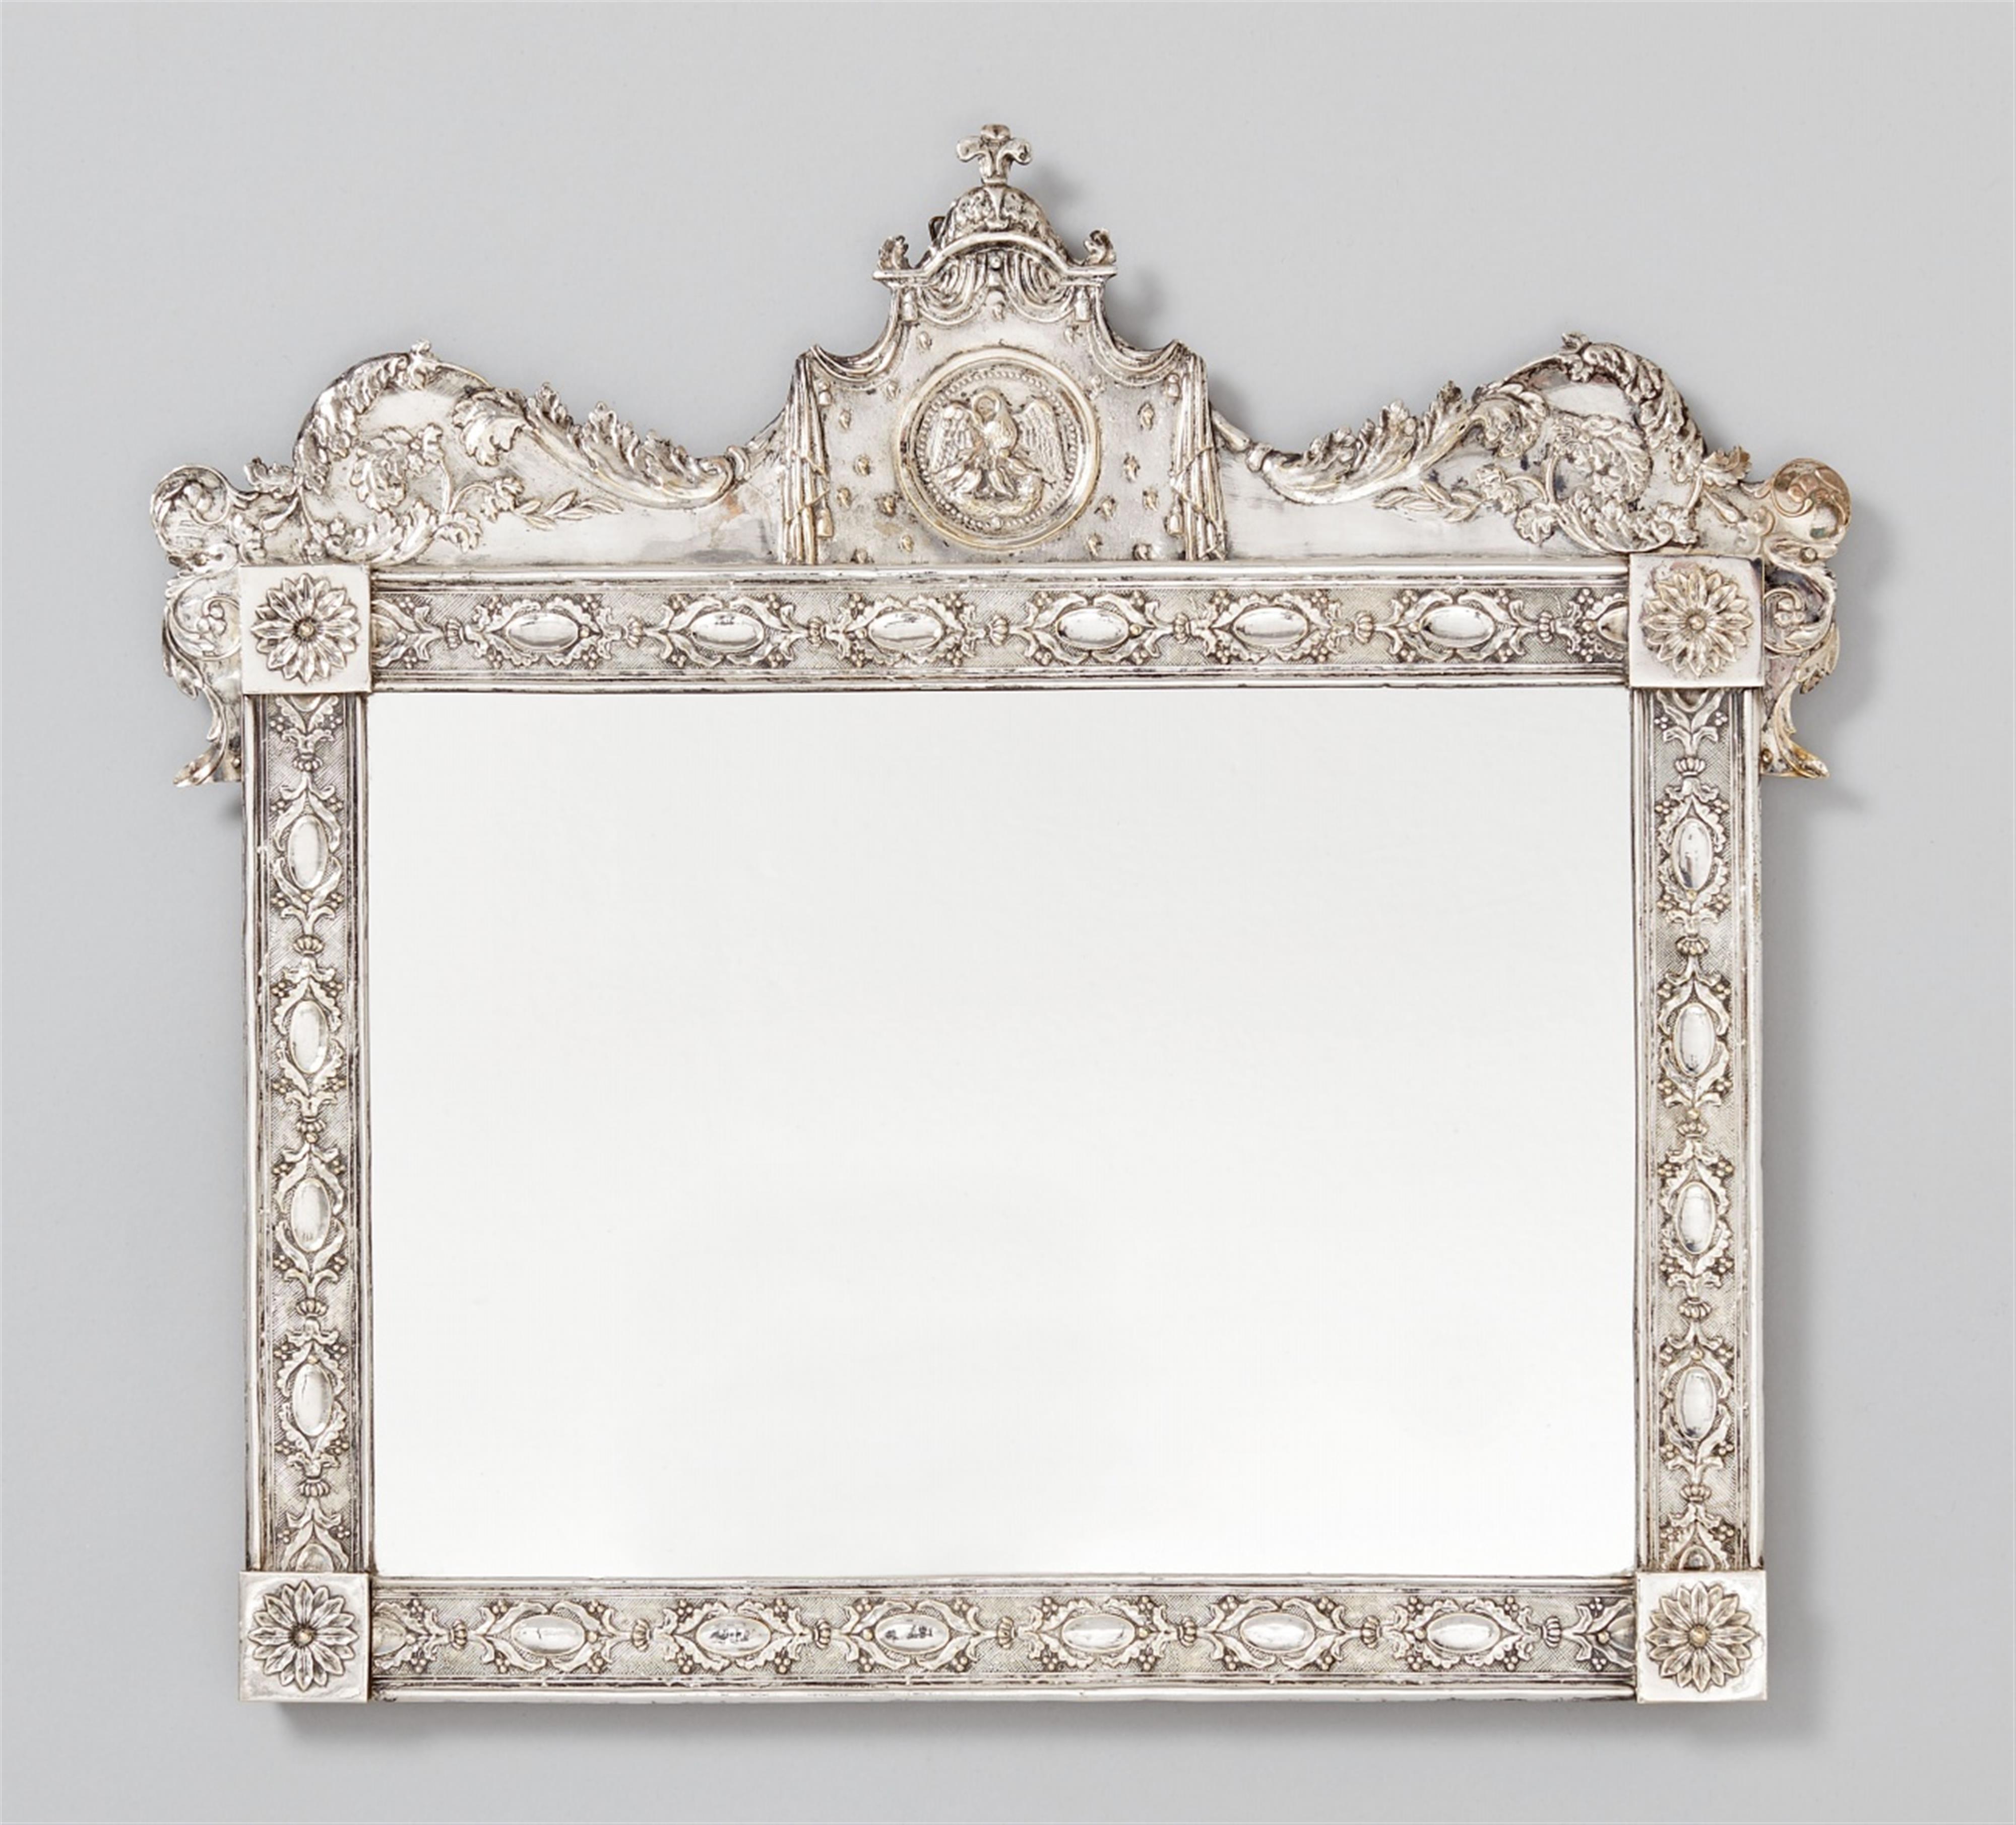 A silver frame. Worked over a wooden corpus, with modern mirror plate. Unmarked, probably German, late 18th C. - image-1